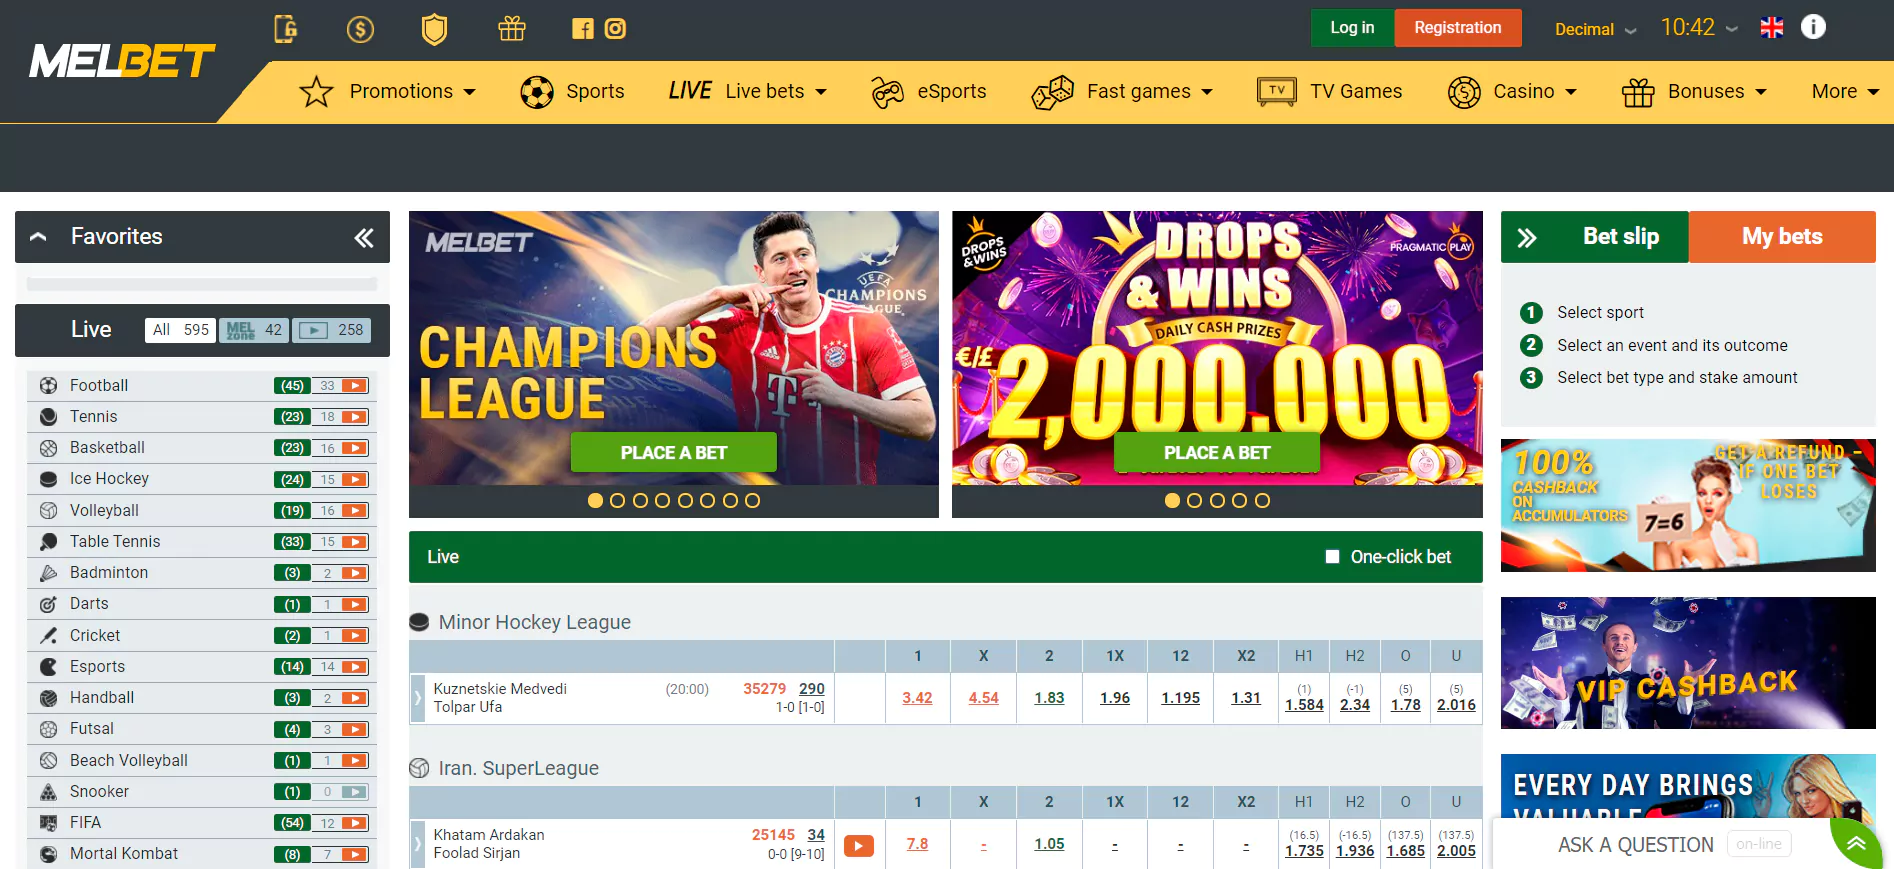 The main menu in online casino games and sports betting from online casino Melbet